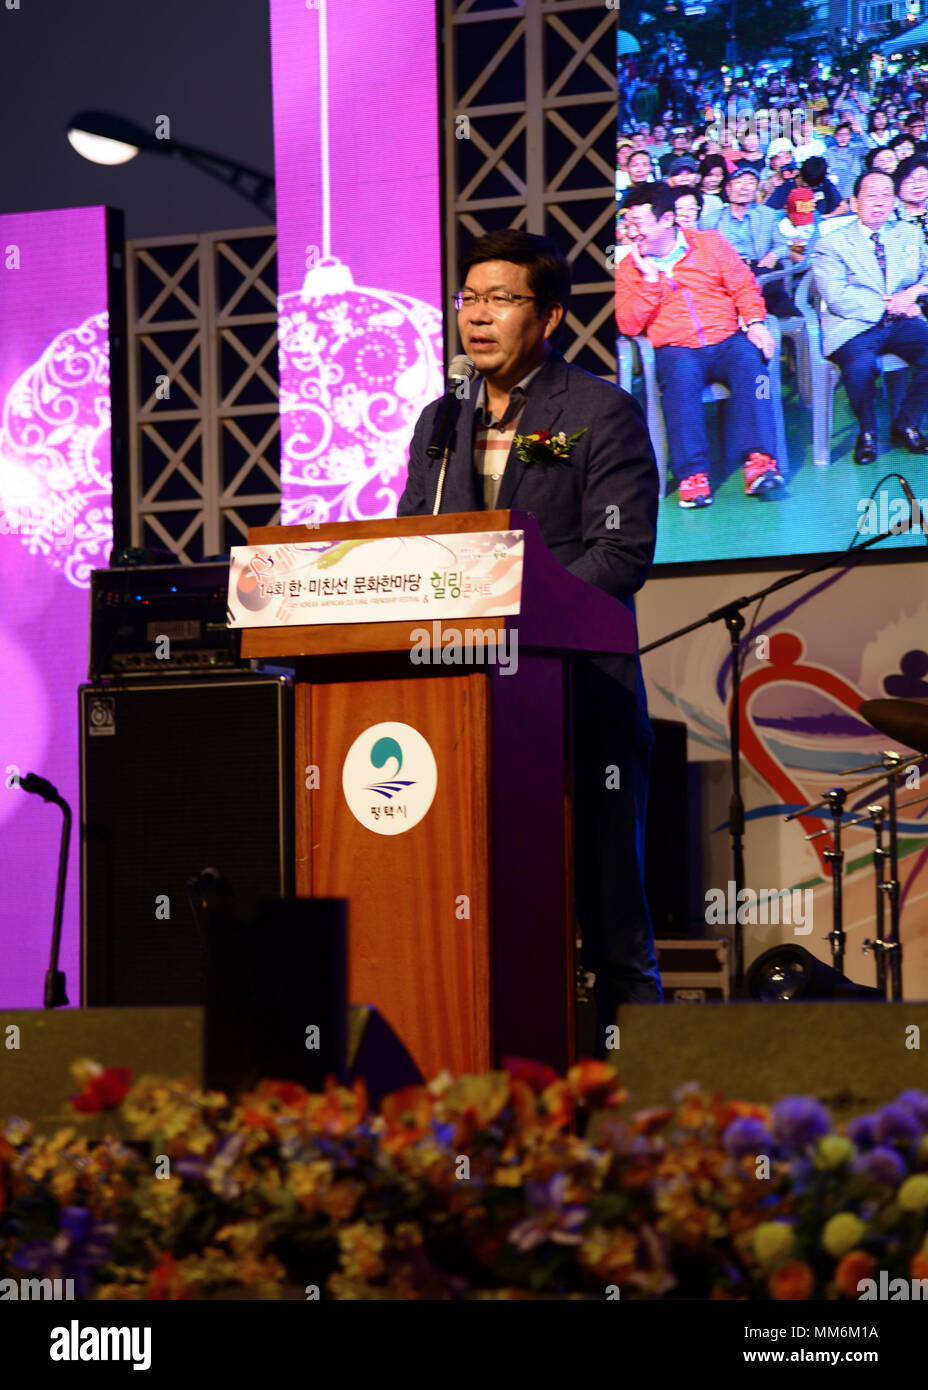 Mr. Kong Jae Kwang, Pyeongtaek City Mayor, speaks during the opening ceremonies of the 14th Annual Korean American Cultural Friendship Festival near Osan Air Base, September 9, 2017. The festival is a two day celebration of the united community between the Korean and American people near Osan Air Base. (U.S. Air Force photo by Staff Sgt. Tinese Jackson) Stock Photo